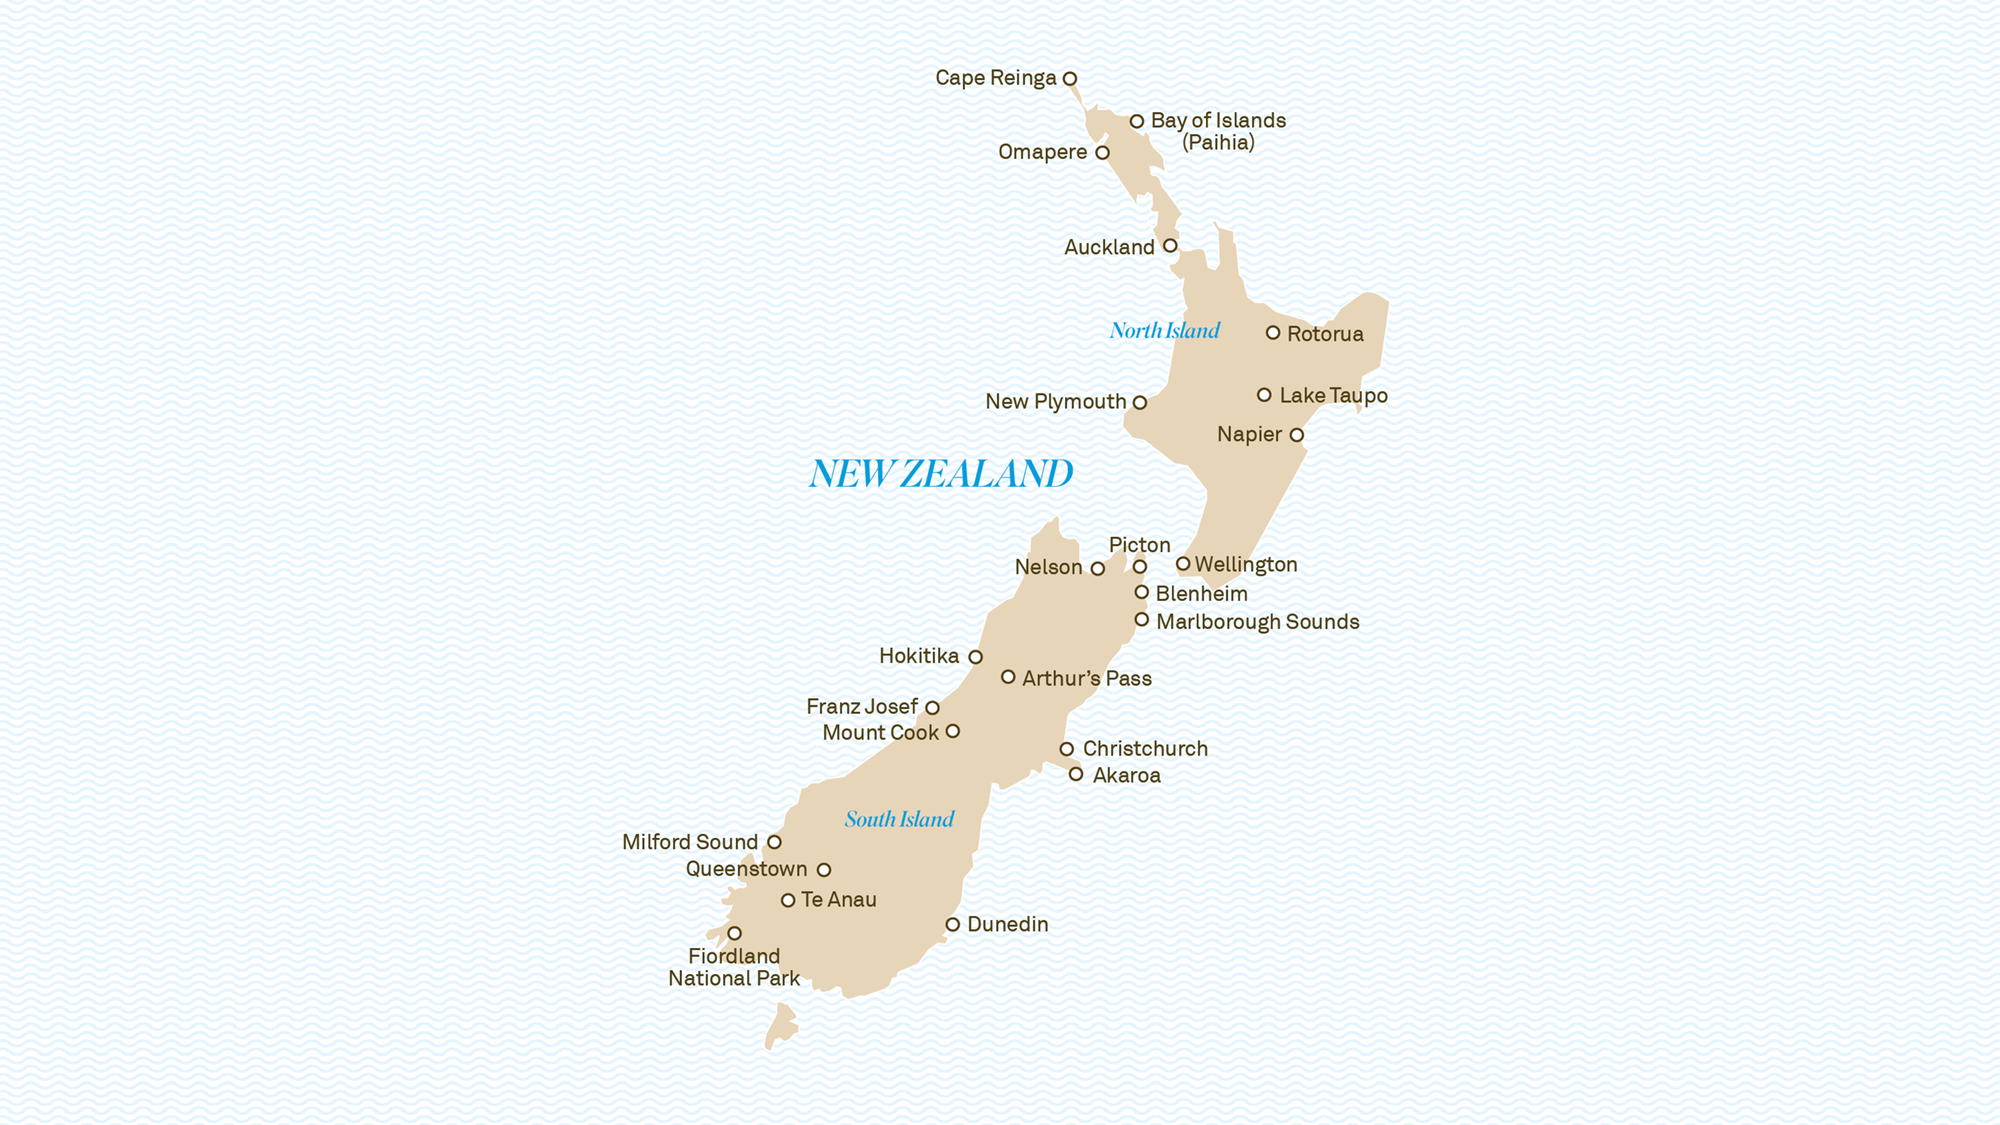 Map of Scenic Land destinations in New Zealand